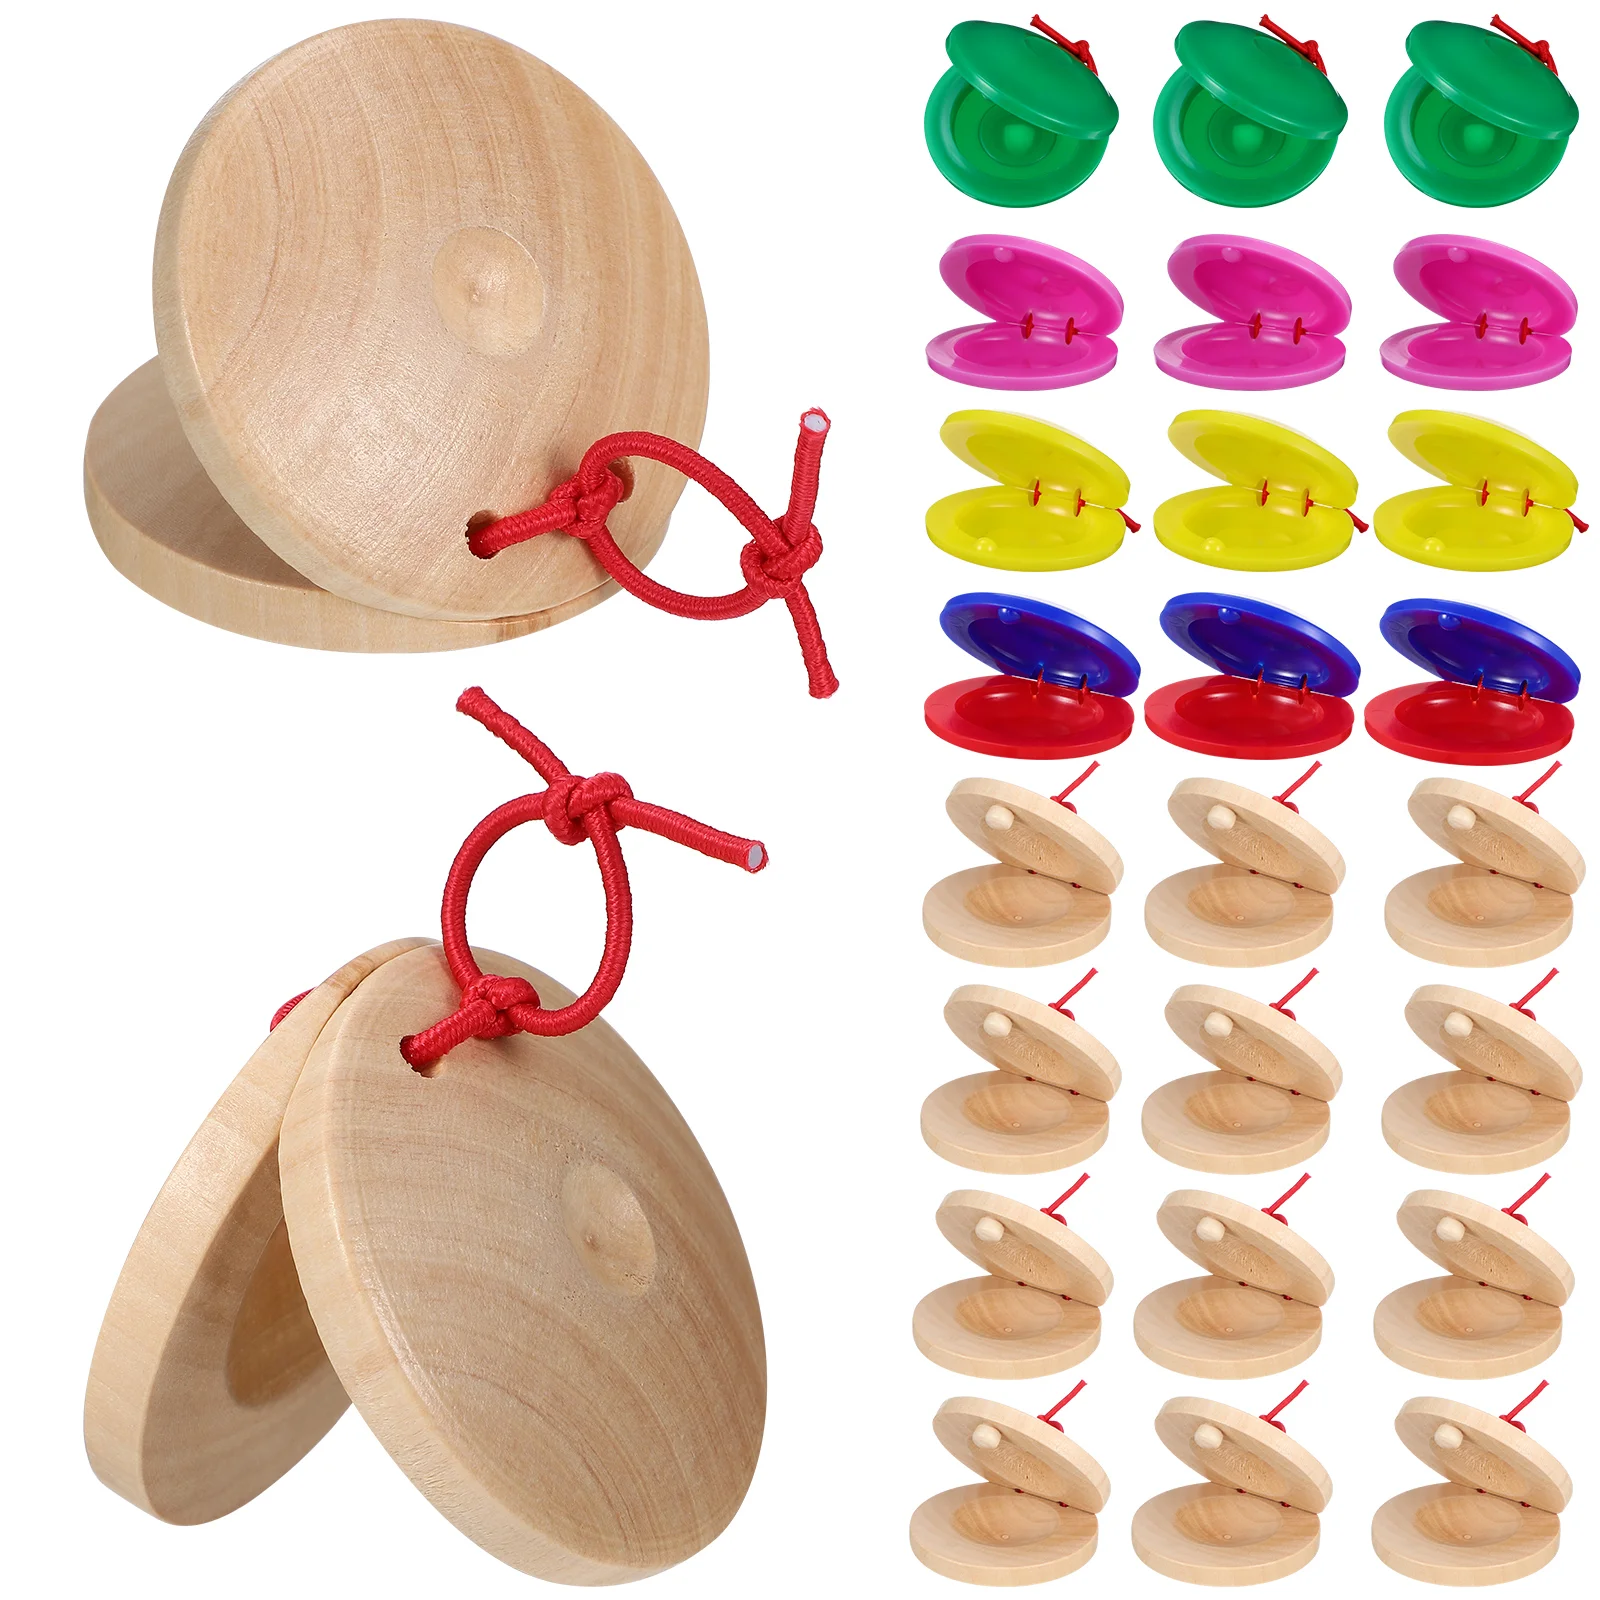 

24Pcs Kids Castanets Music Rhythm Percussion Instrument Toy Educational Toys